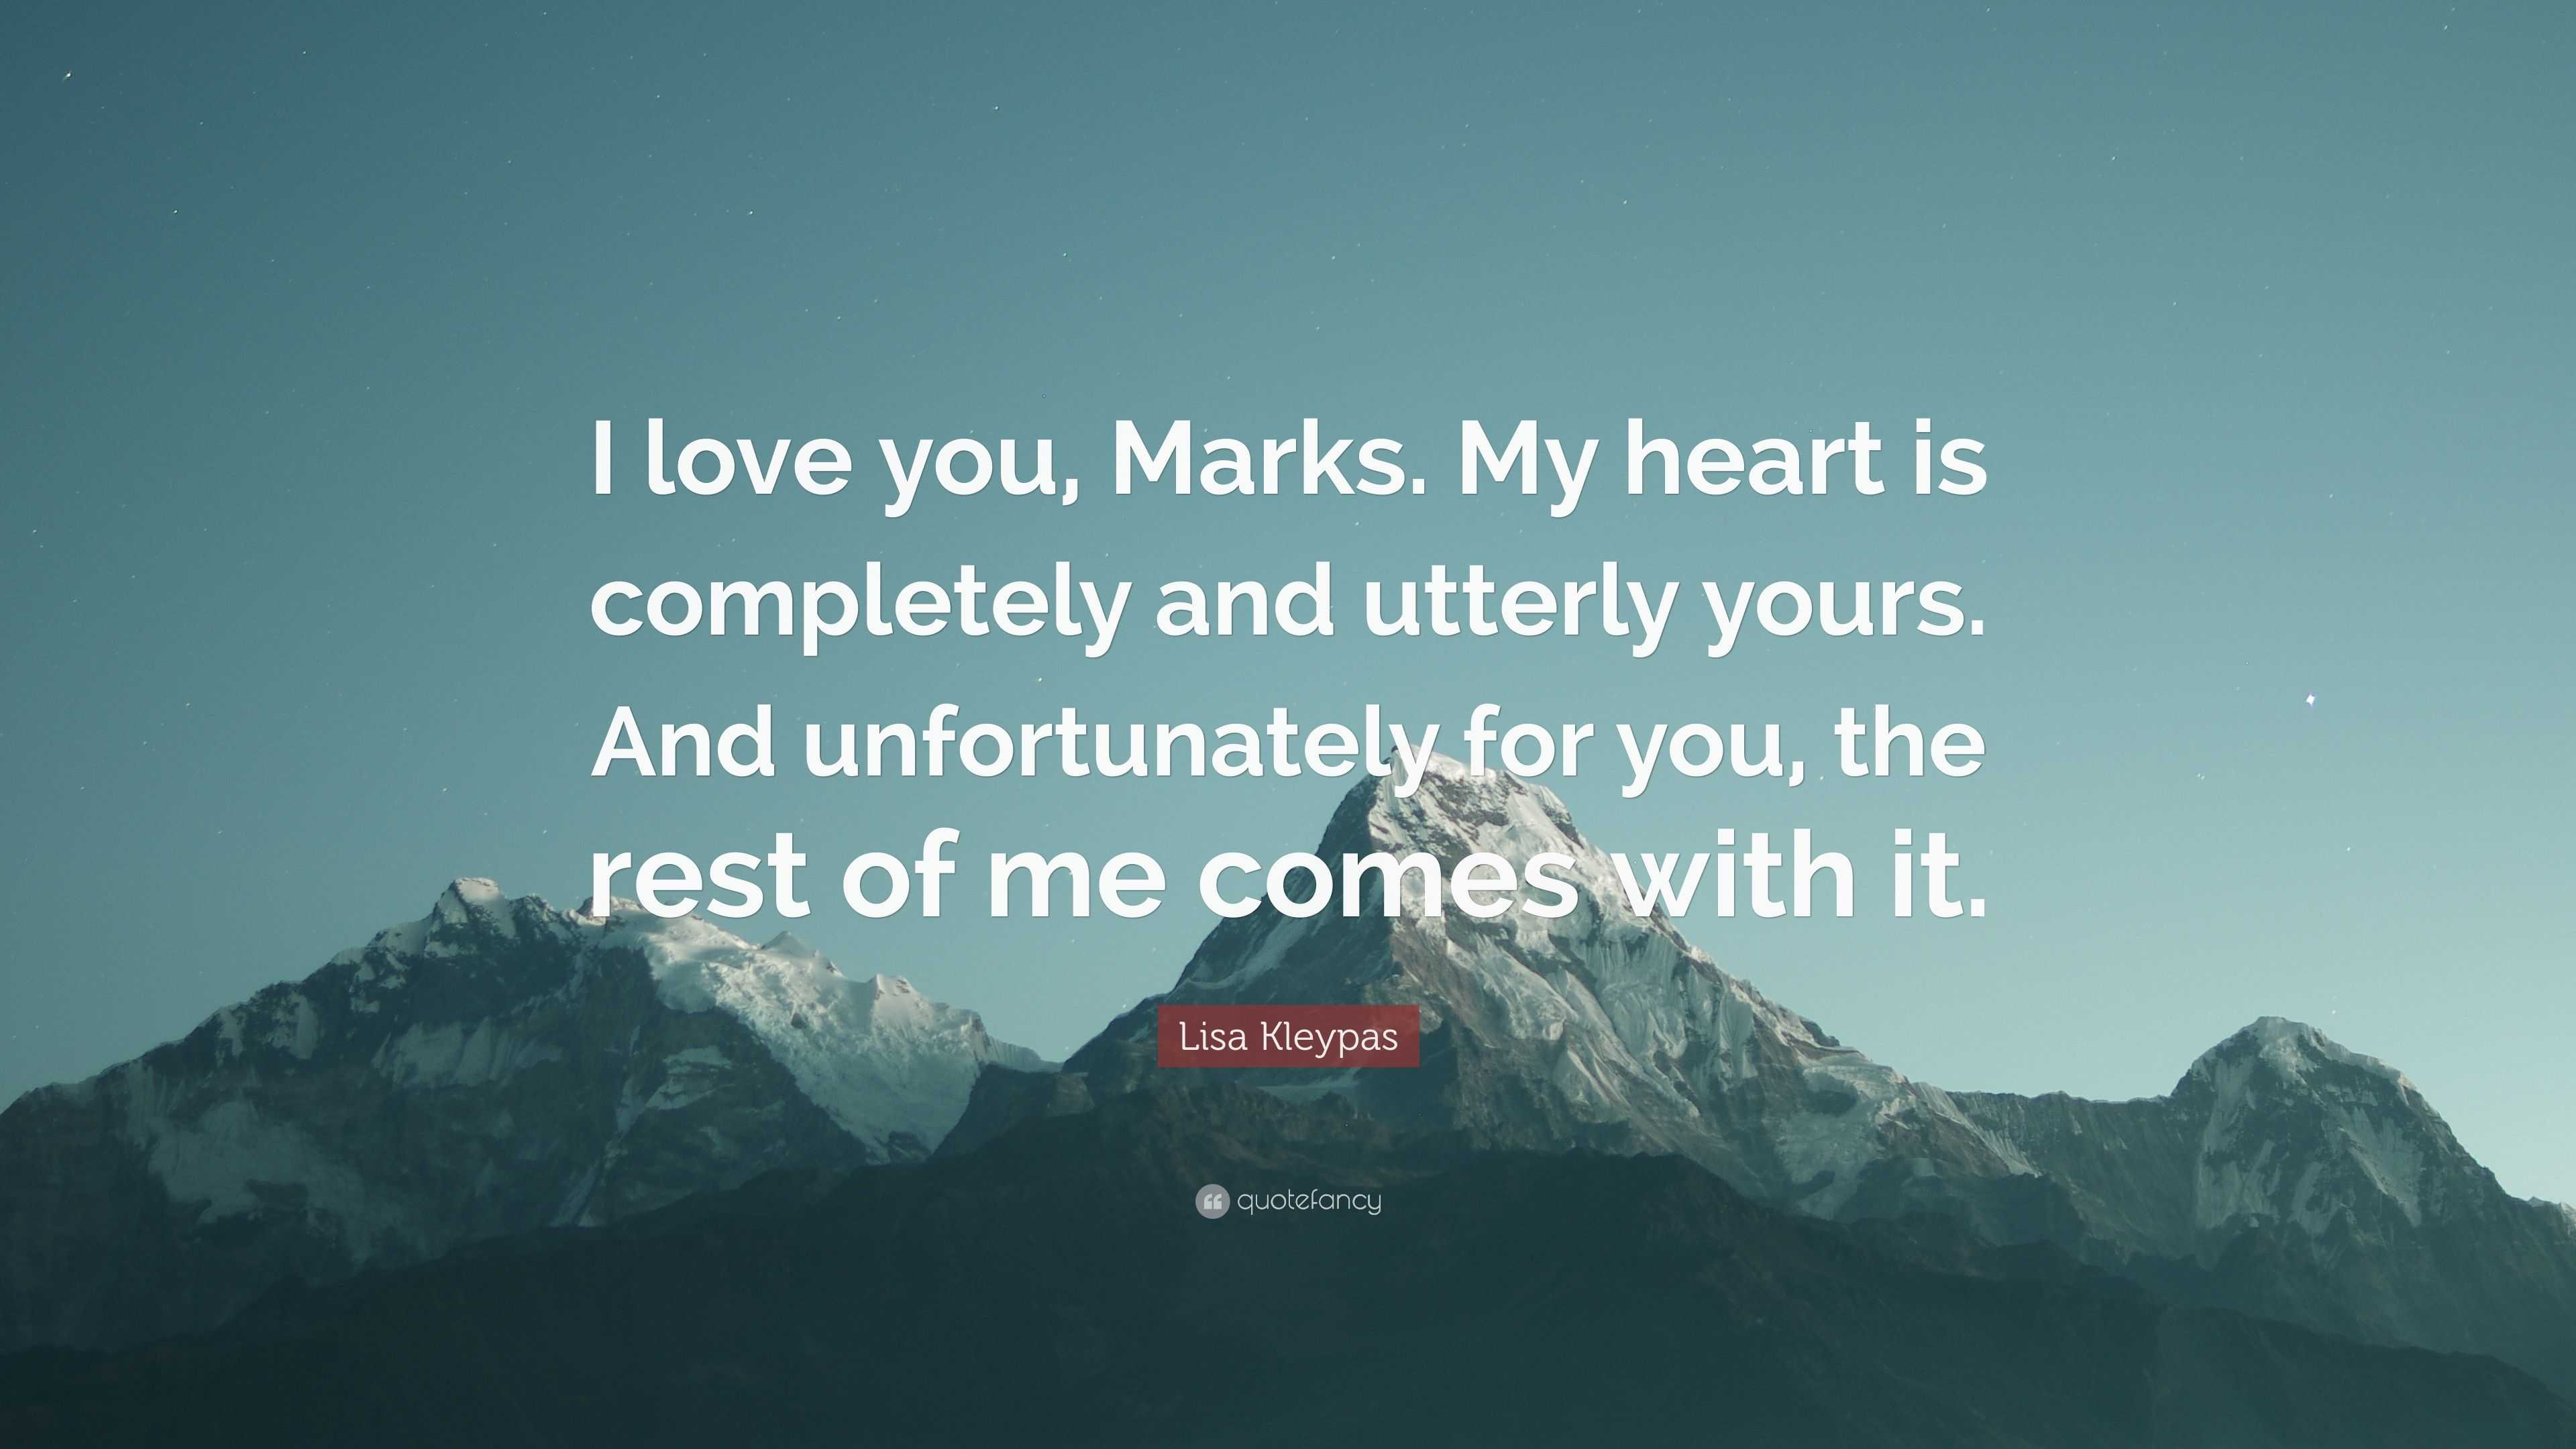 Lisa Kleypas Quote “I love you Marks My heart is pletely and